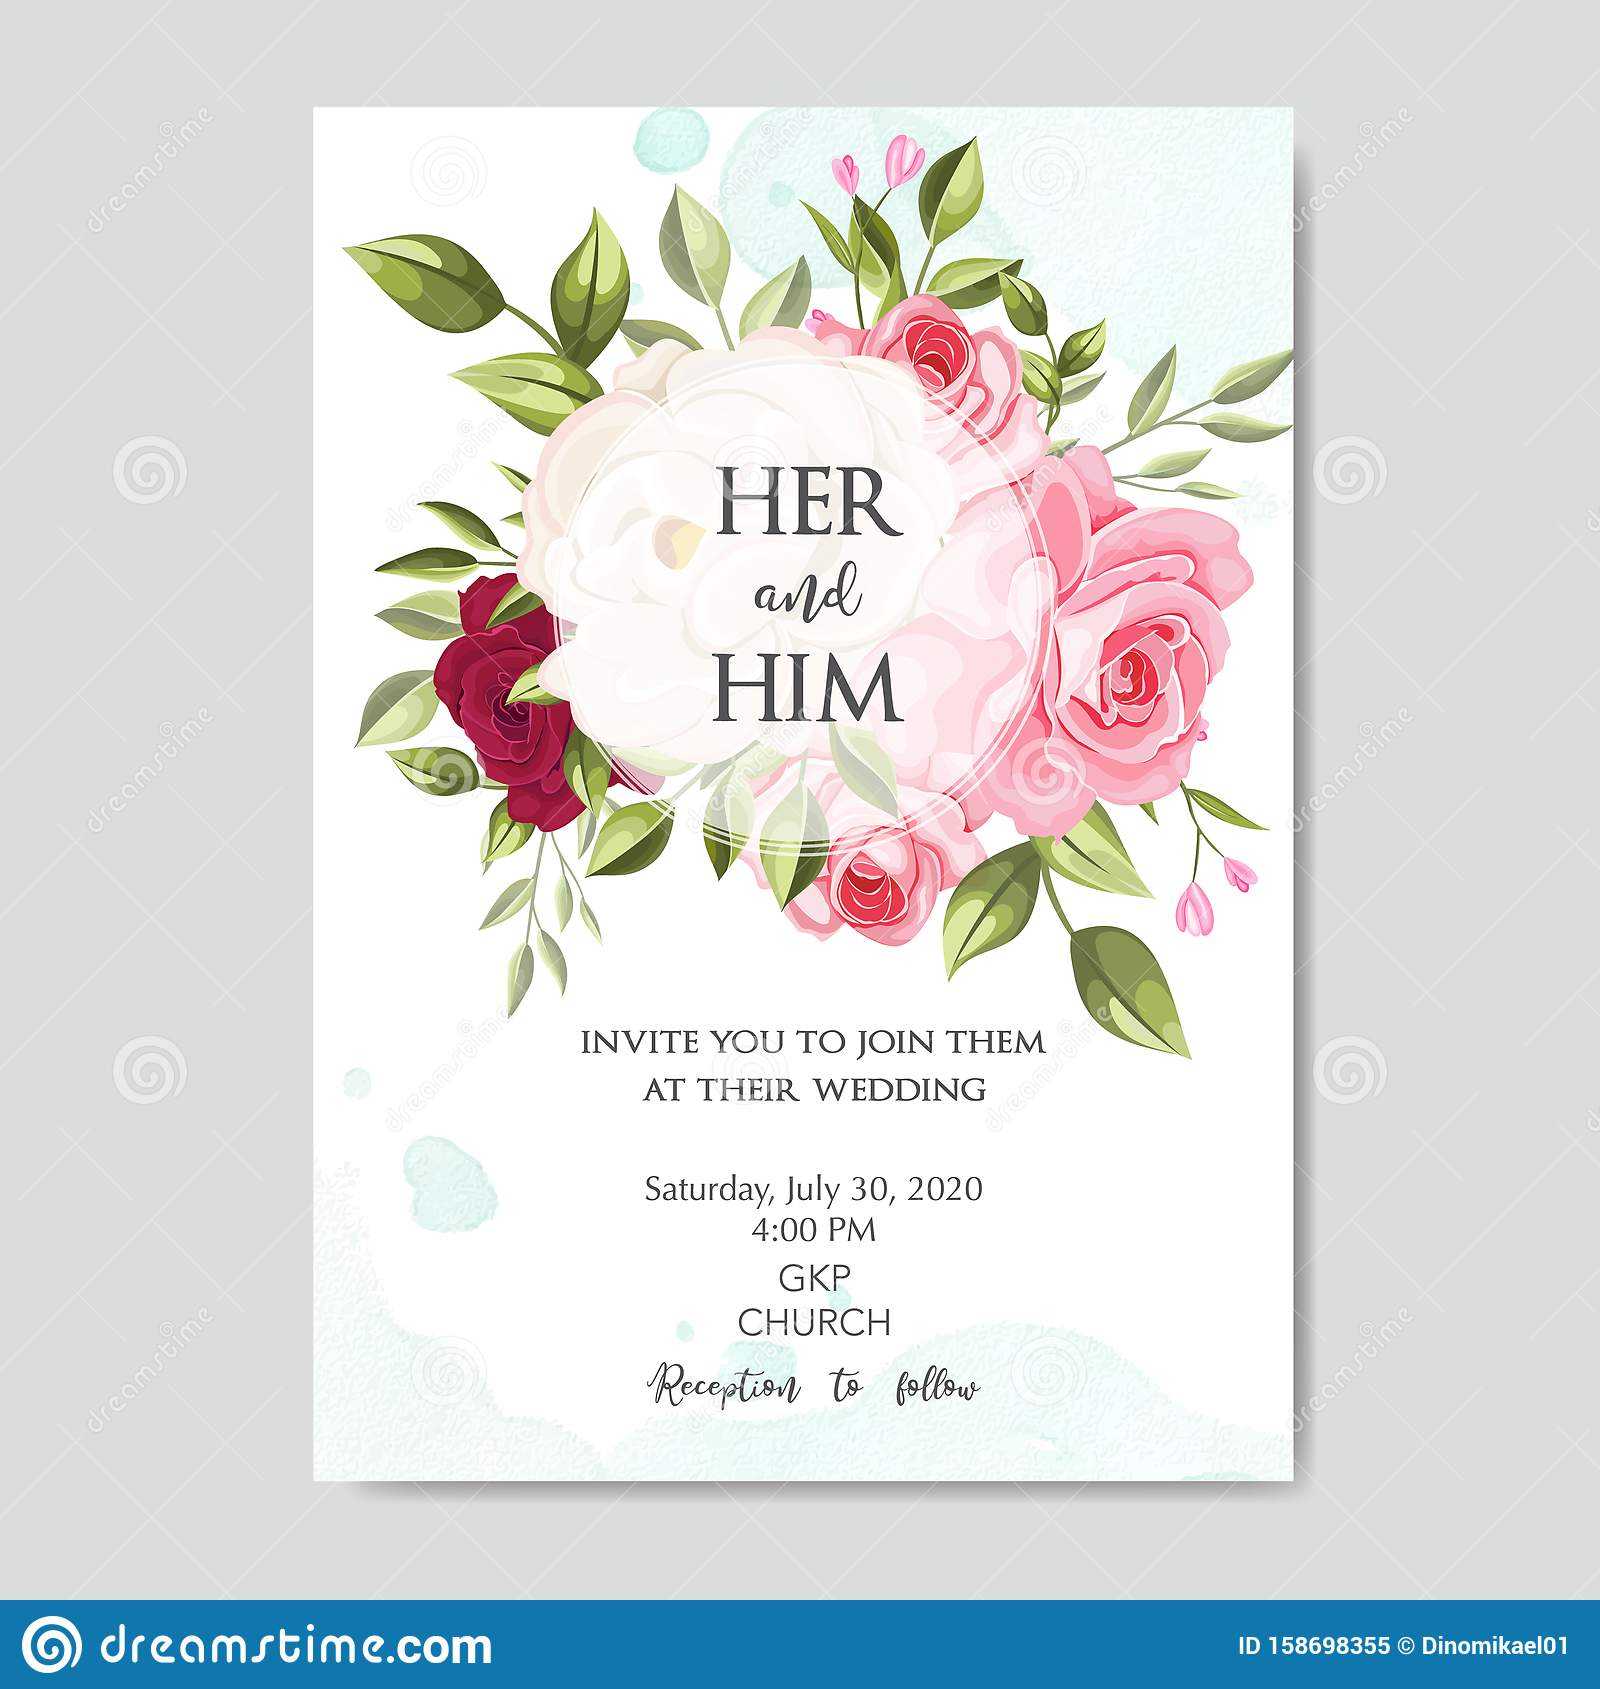 Beautiful Wedding Invitation Card Template With Floral Intended For Church Wedding Invitation Card Template